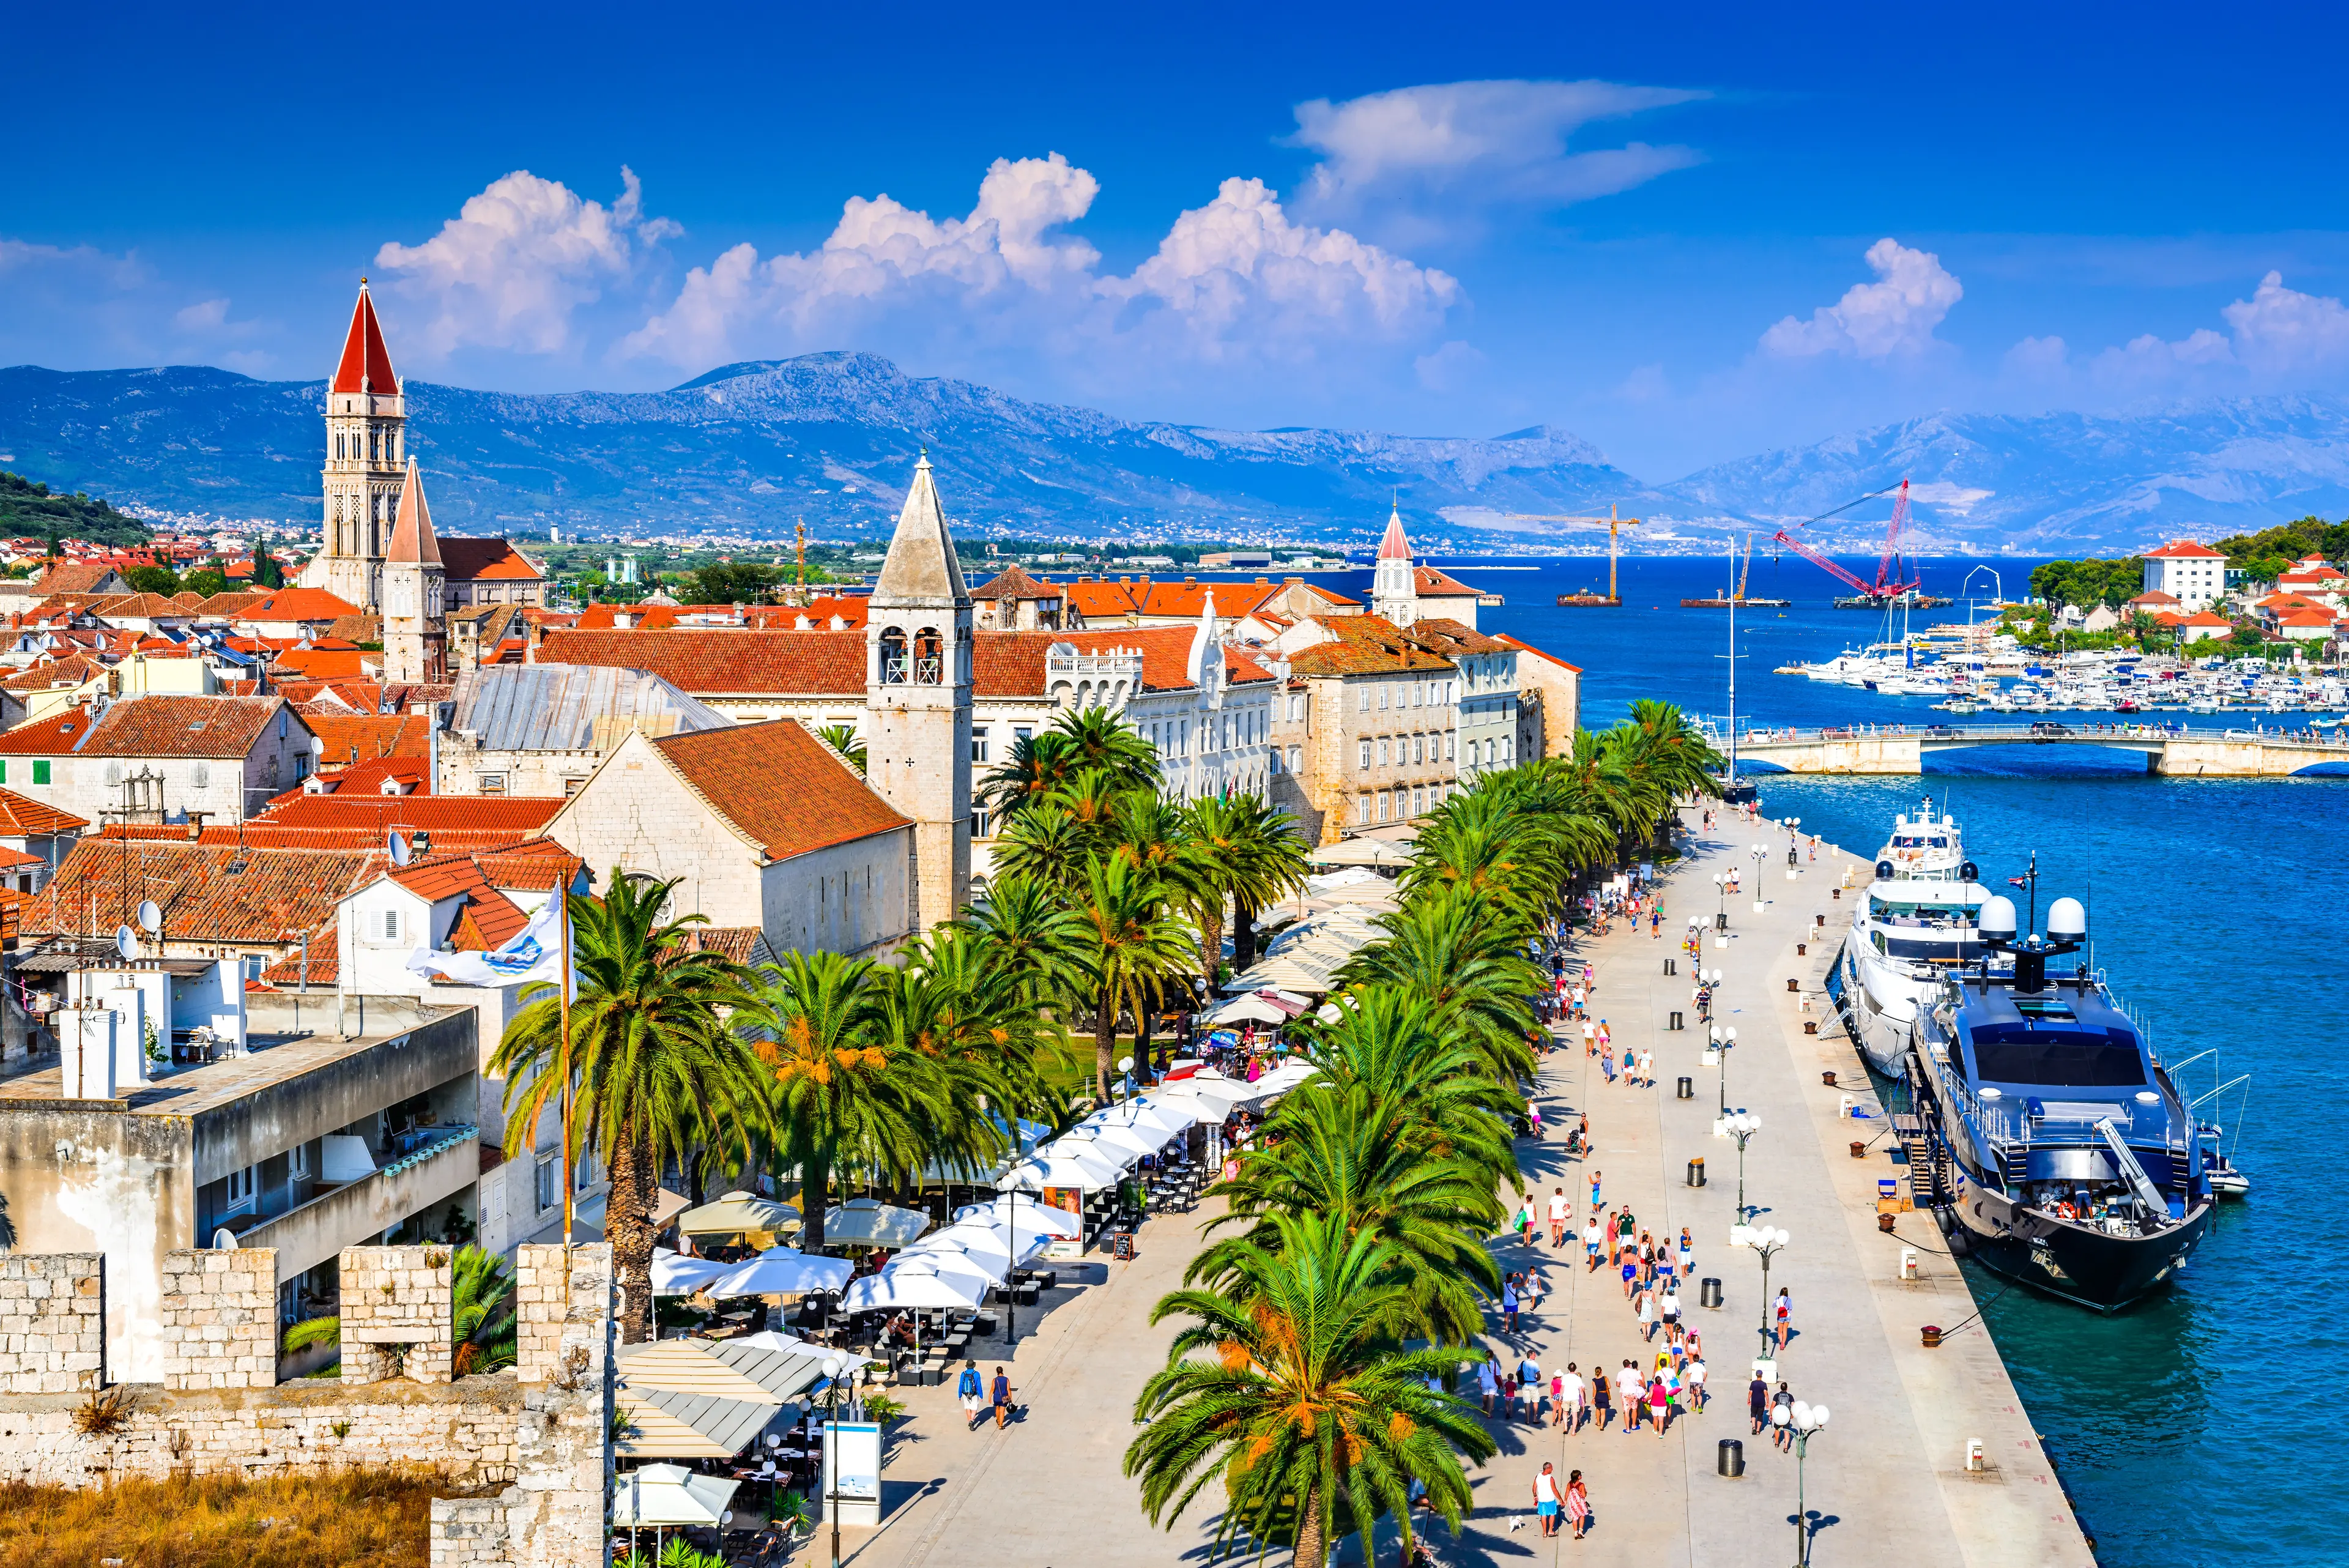 1-Day Relaxing and Shopping Experience in Trogir for Couples